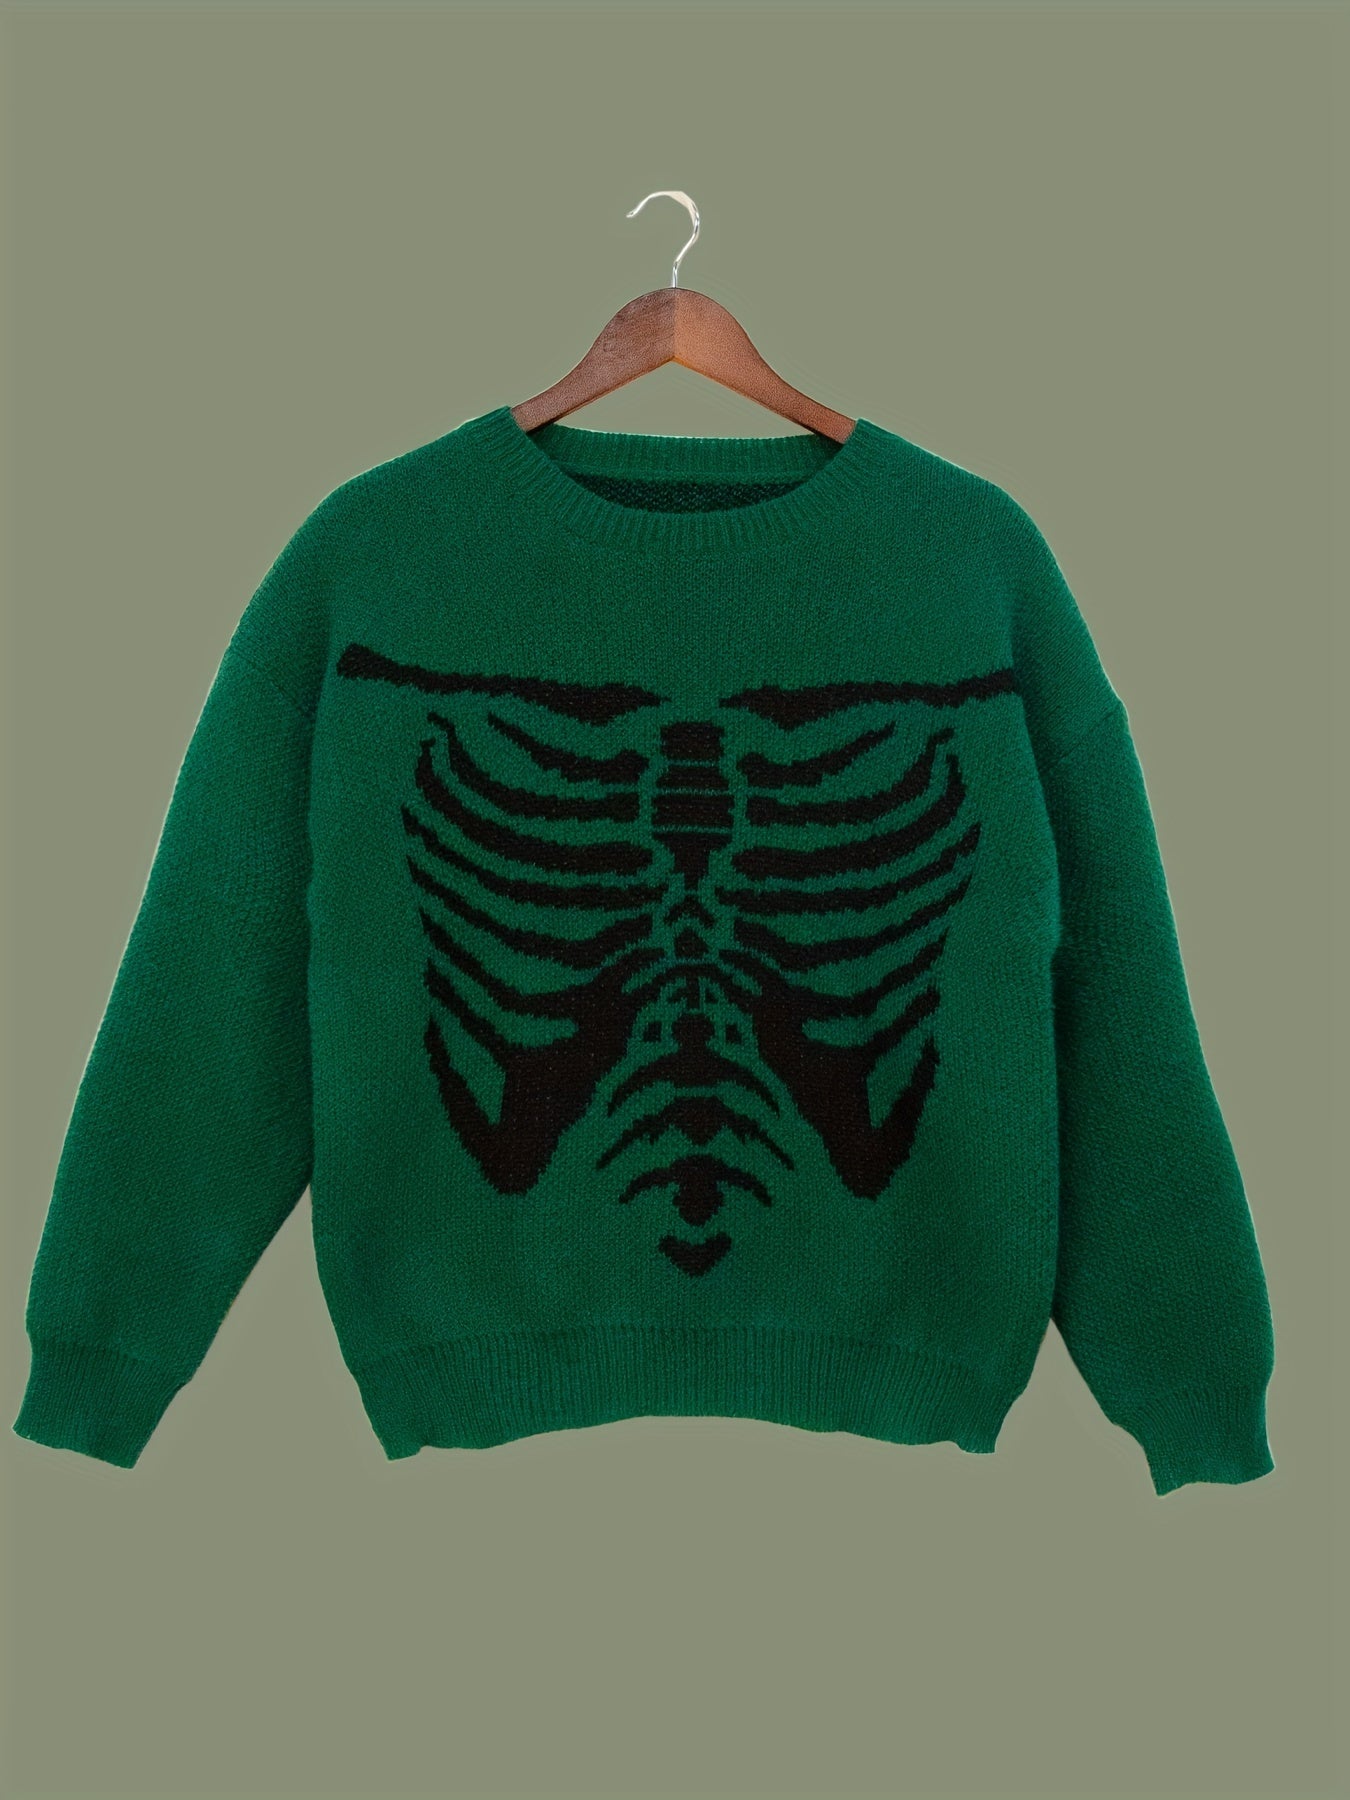 Antmvs Skeleton Pattern Drop Shoulder Sweater, Casual Long Sleeve Crew Neck Sweater For Fall & Winter, Women's Clothing